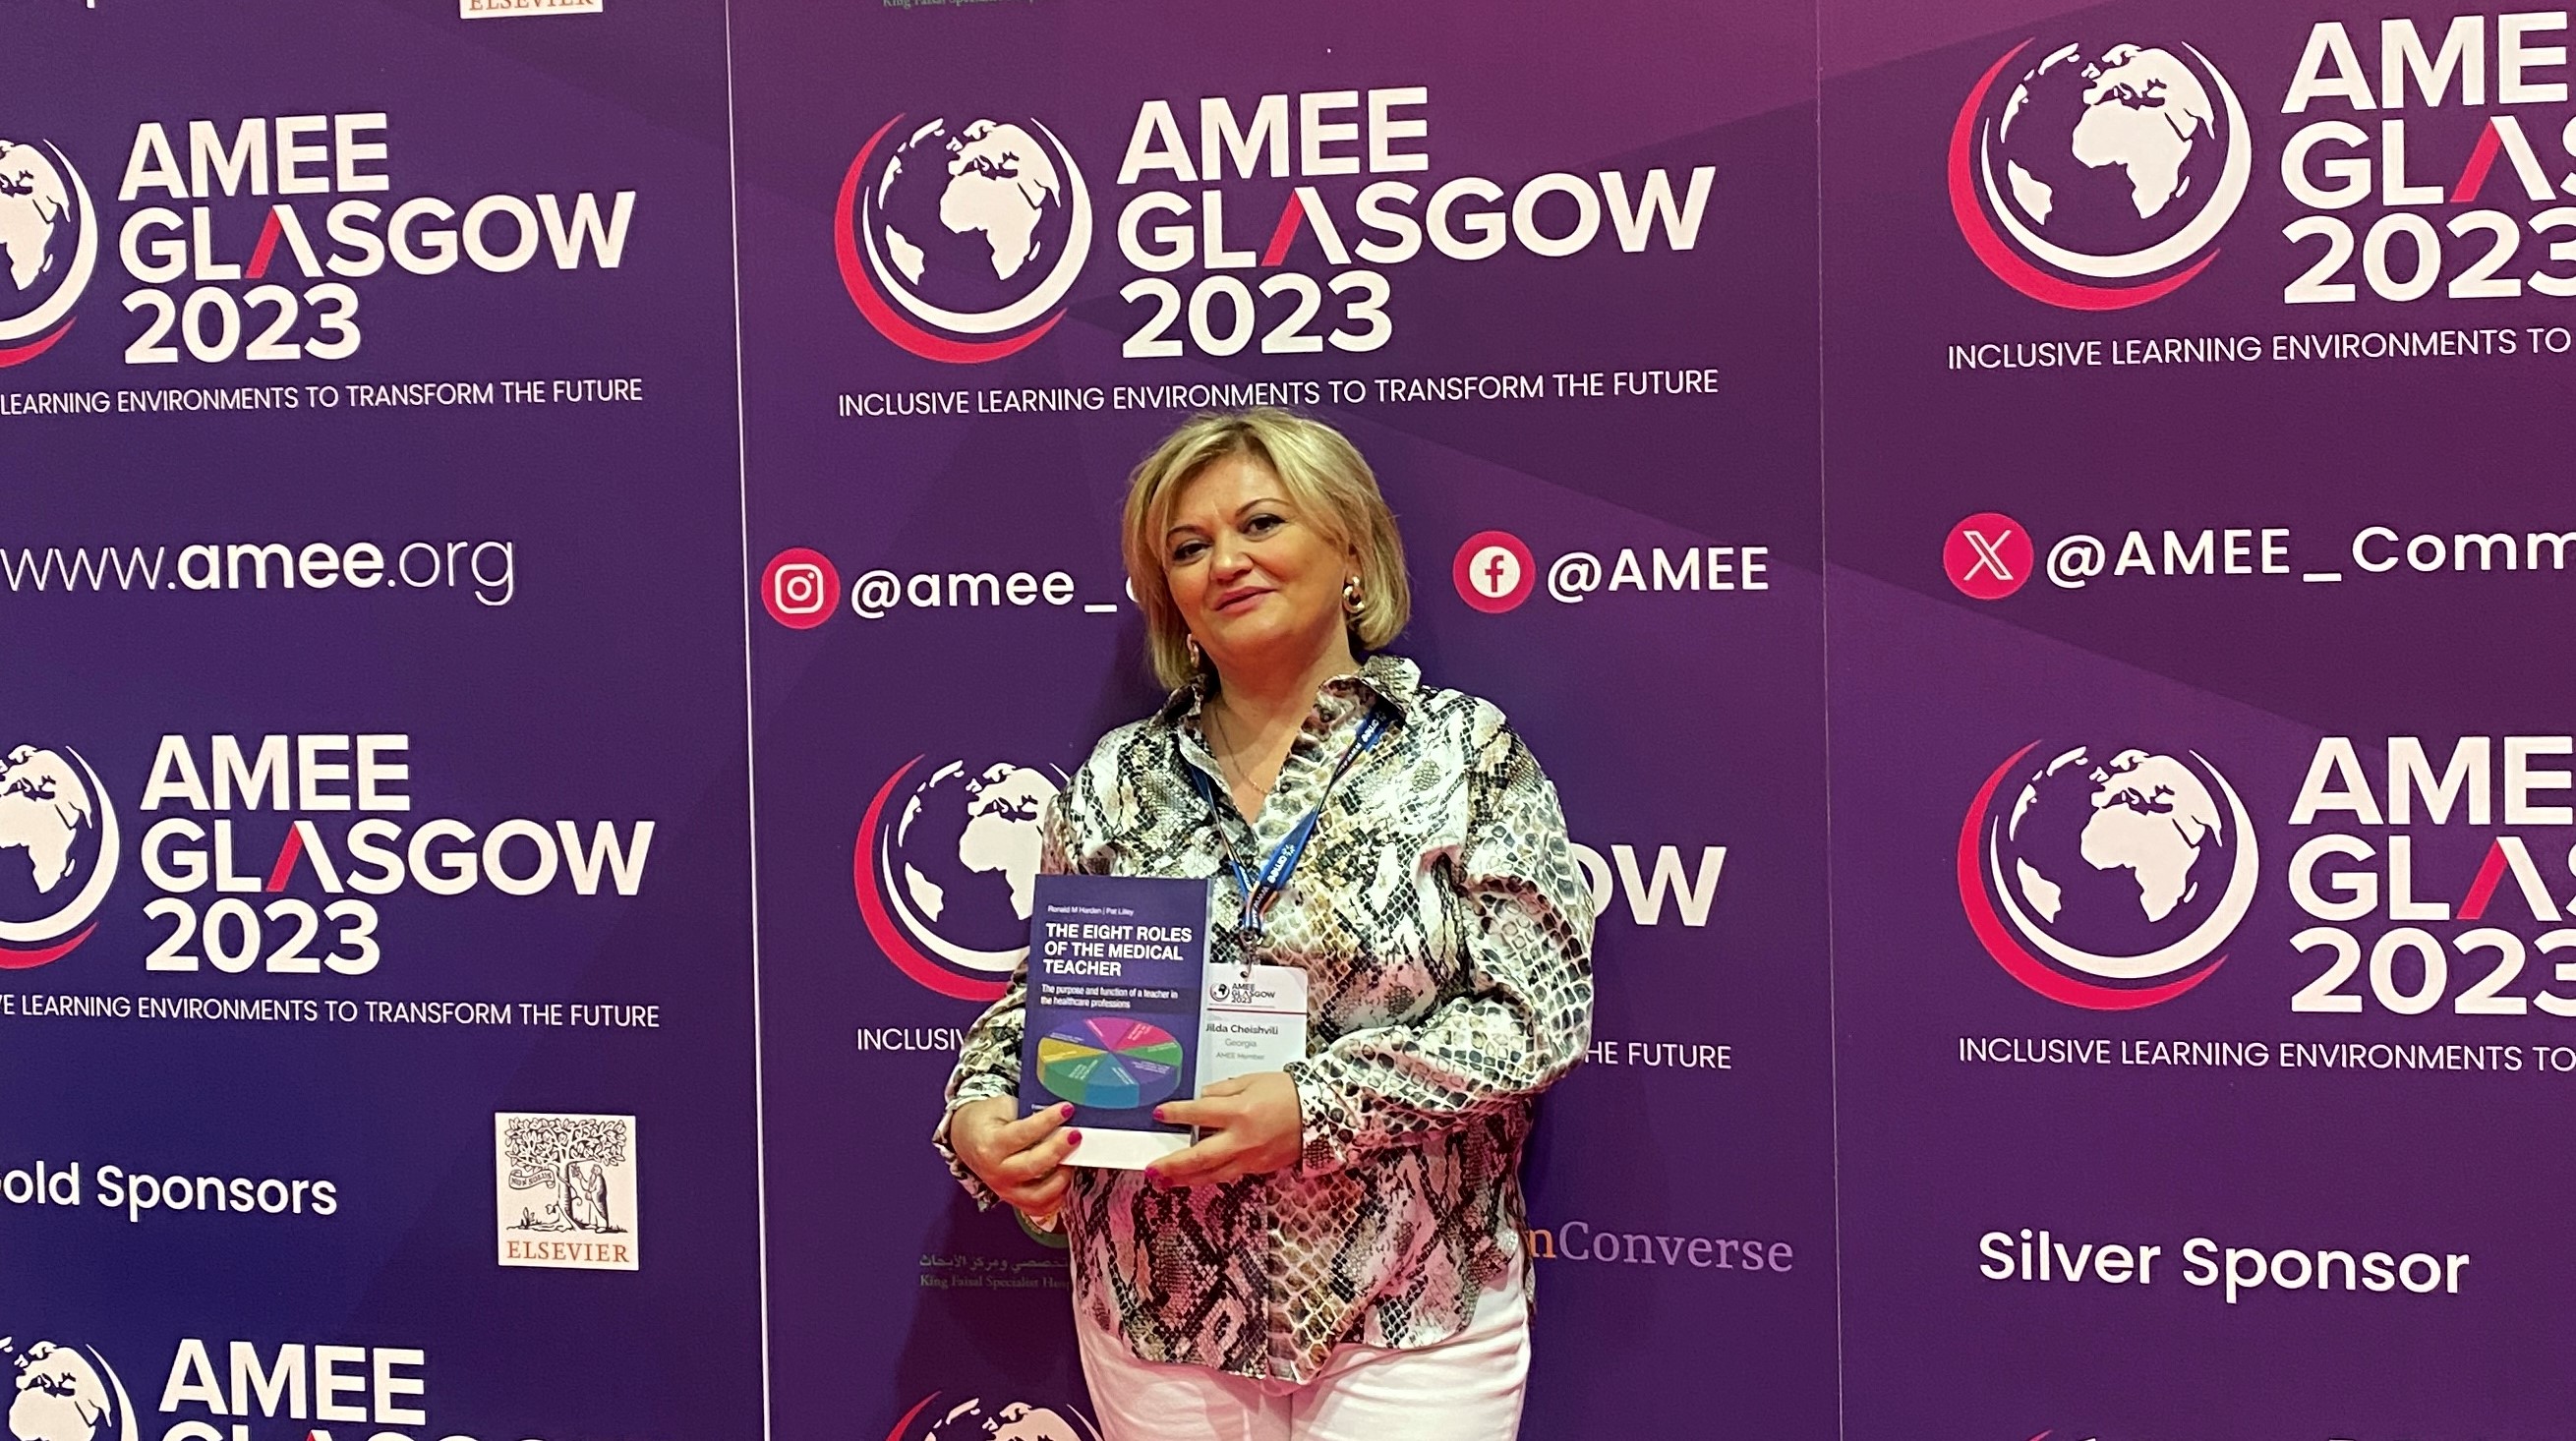 The Dean of Medical Faculty has attended the International Conference AMEE 2023